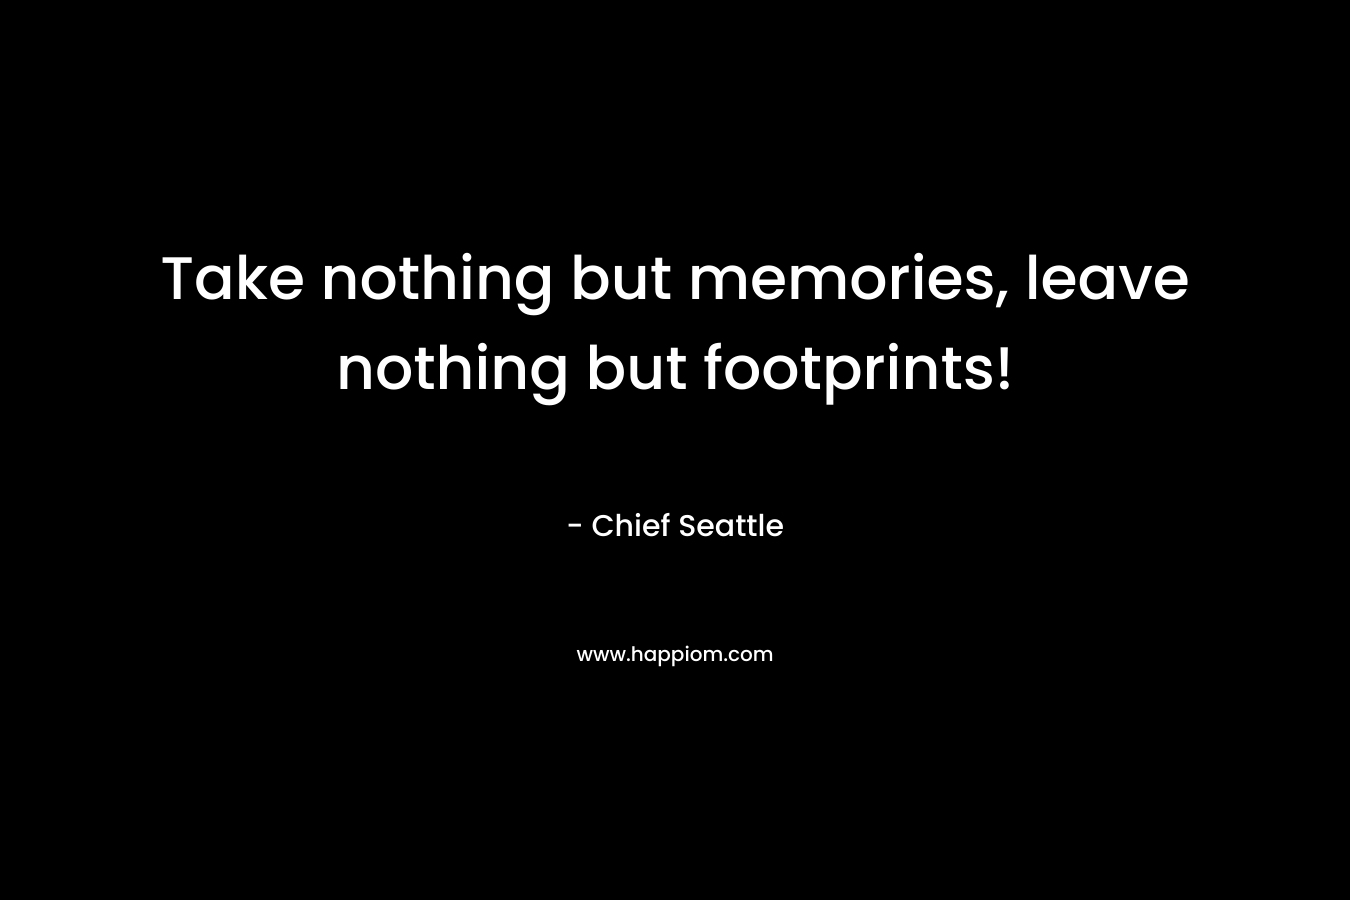 Take nothing but memories, leave nothing but footprints! – Chief Seattle